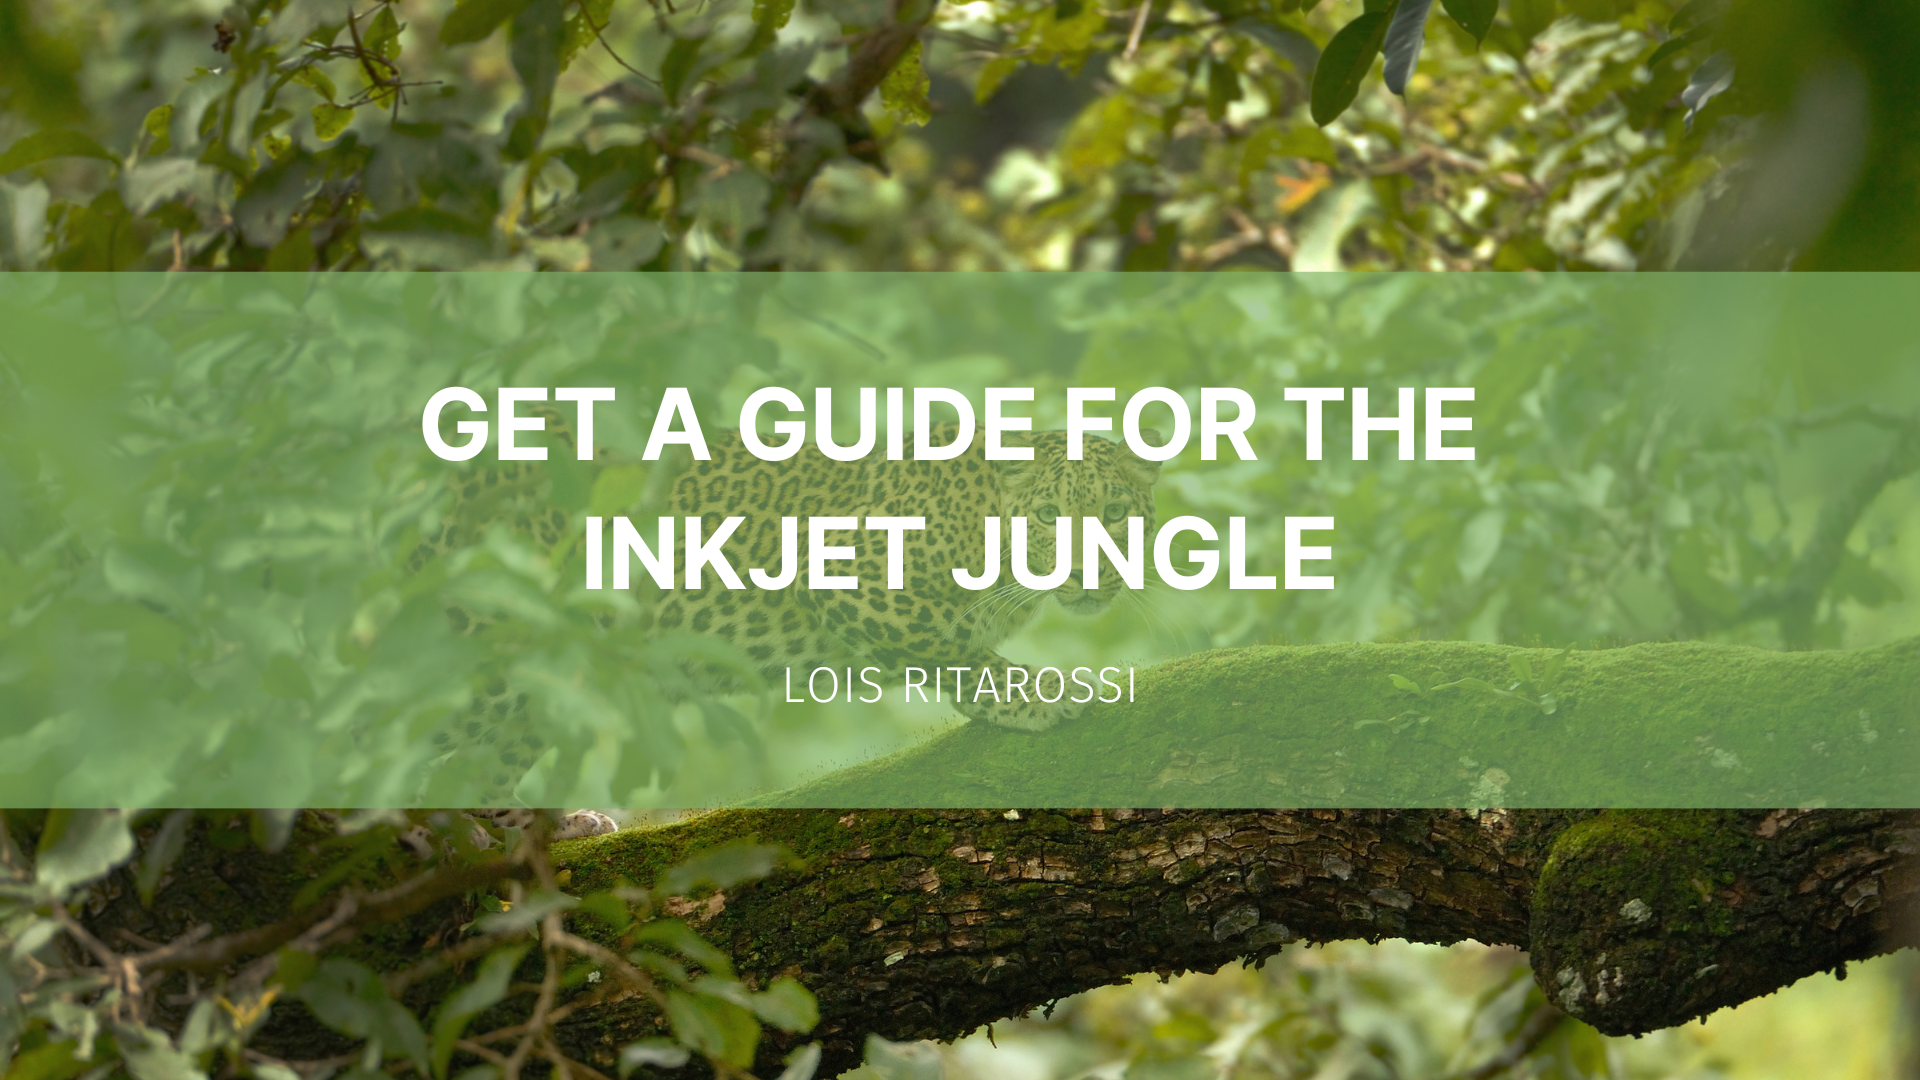 Featured image for “Get a guide for the inkjet jungle”